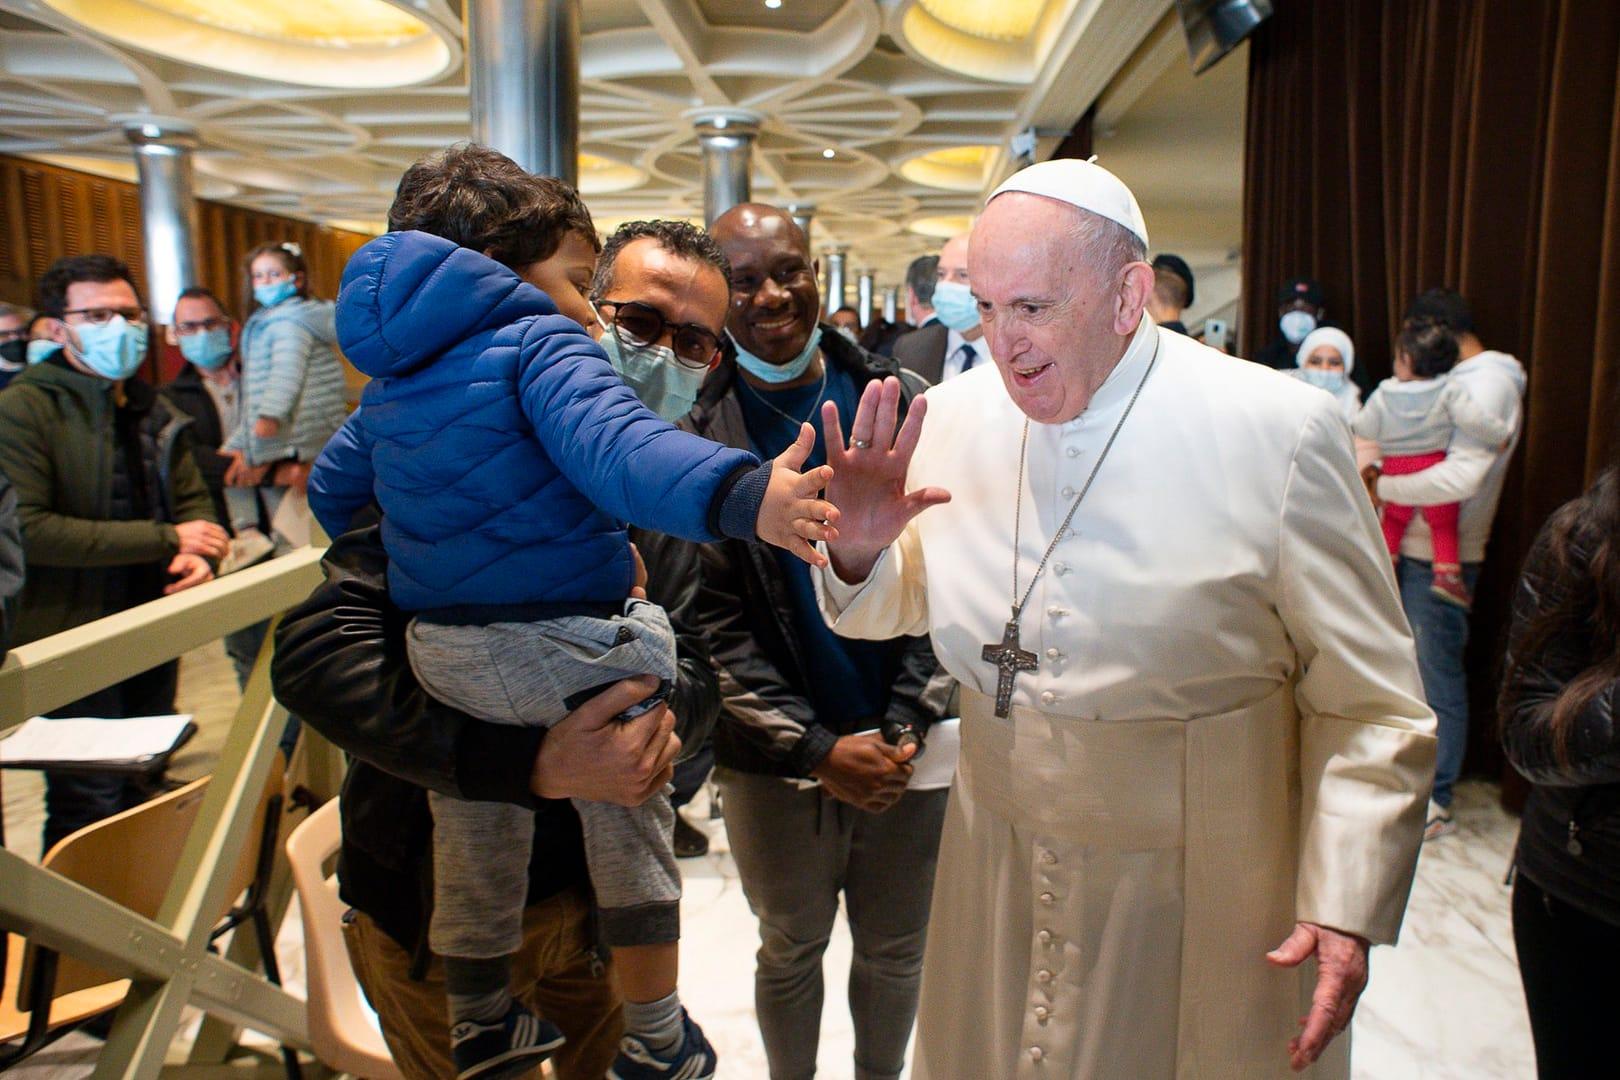 Pope doubles down in press for equity in vaccine distribution